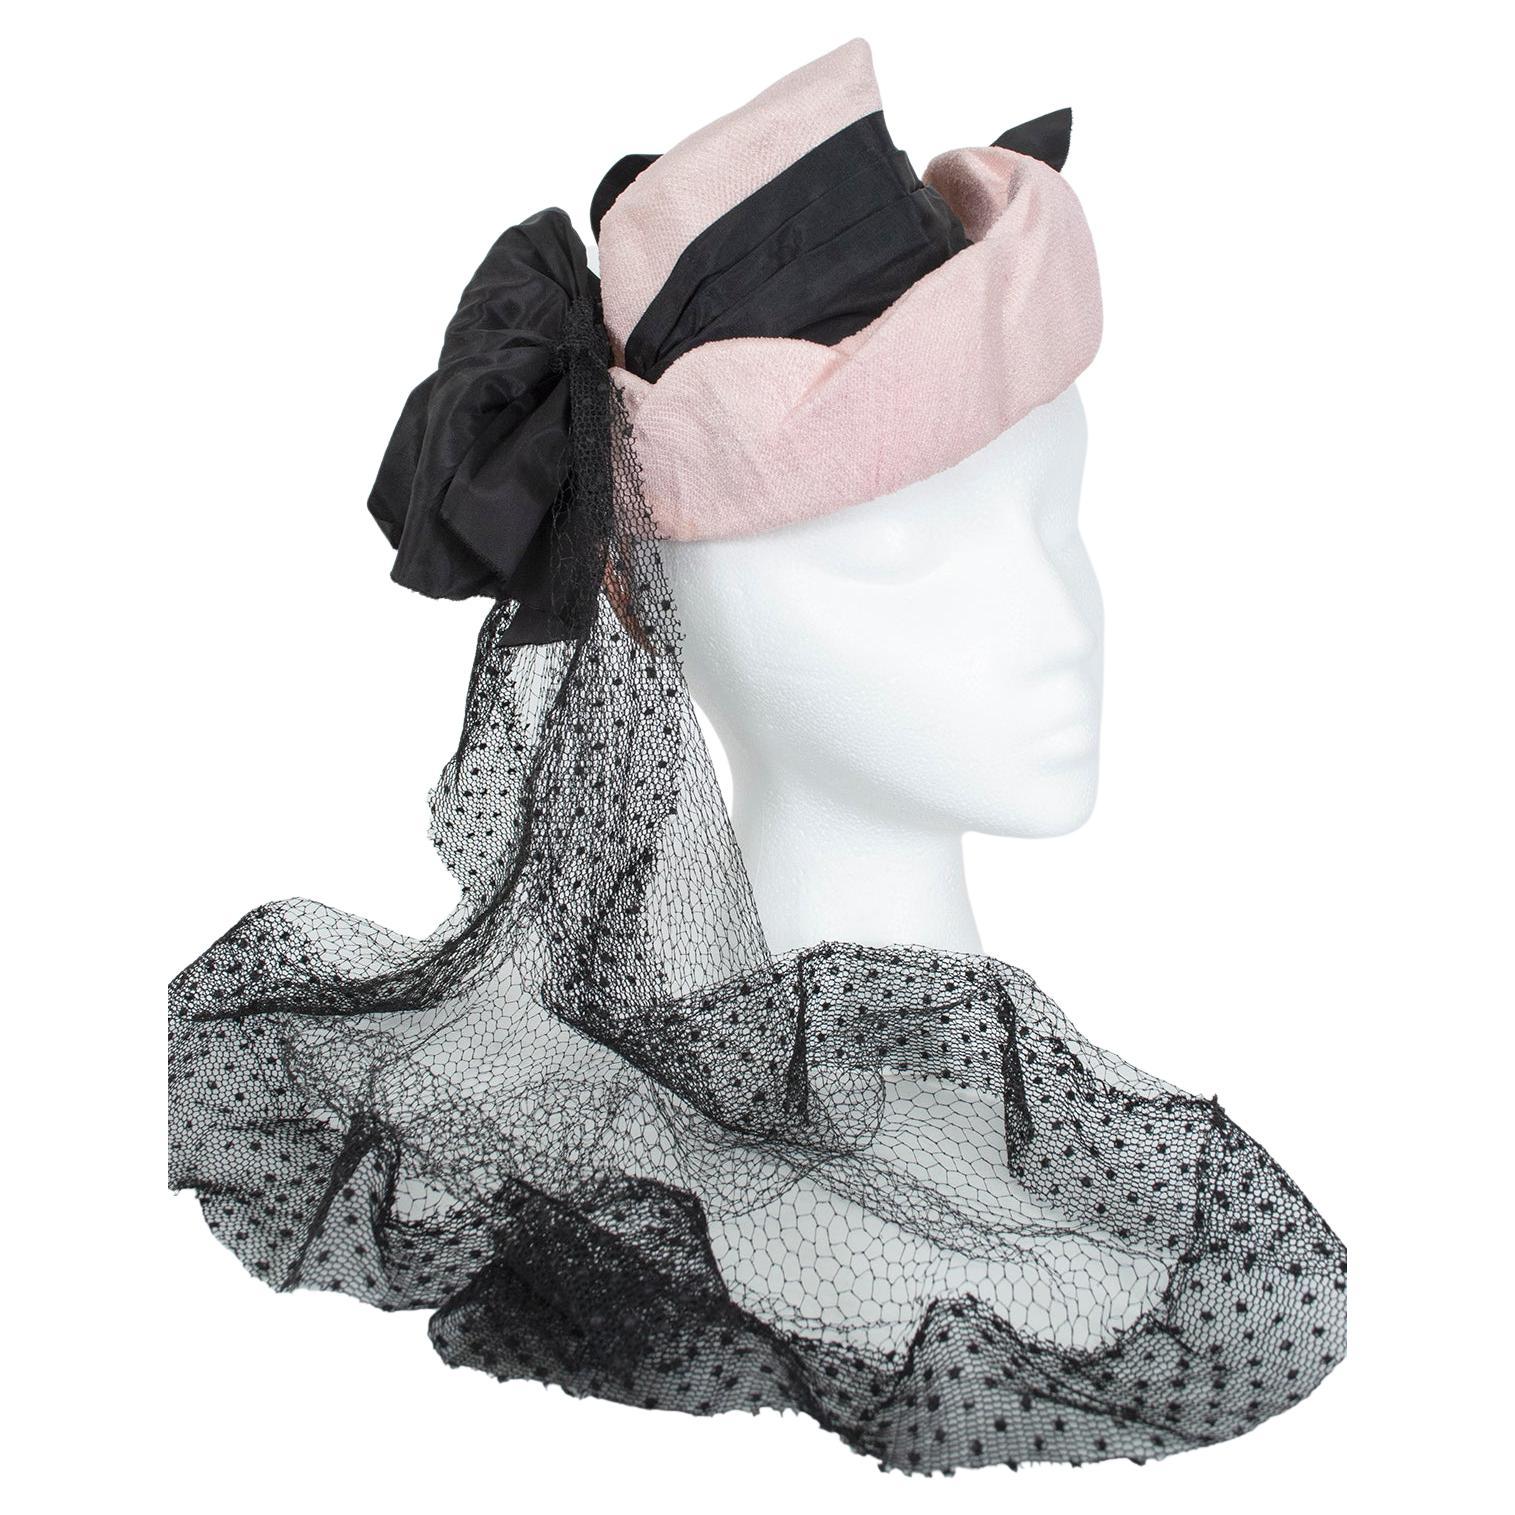 Light Pink Miniature Tilted Top Hat with Trailing Black Veil – O/S, 1930s